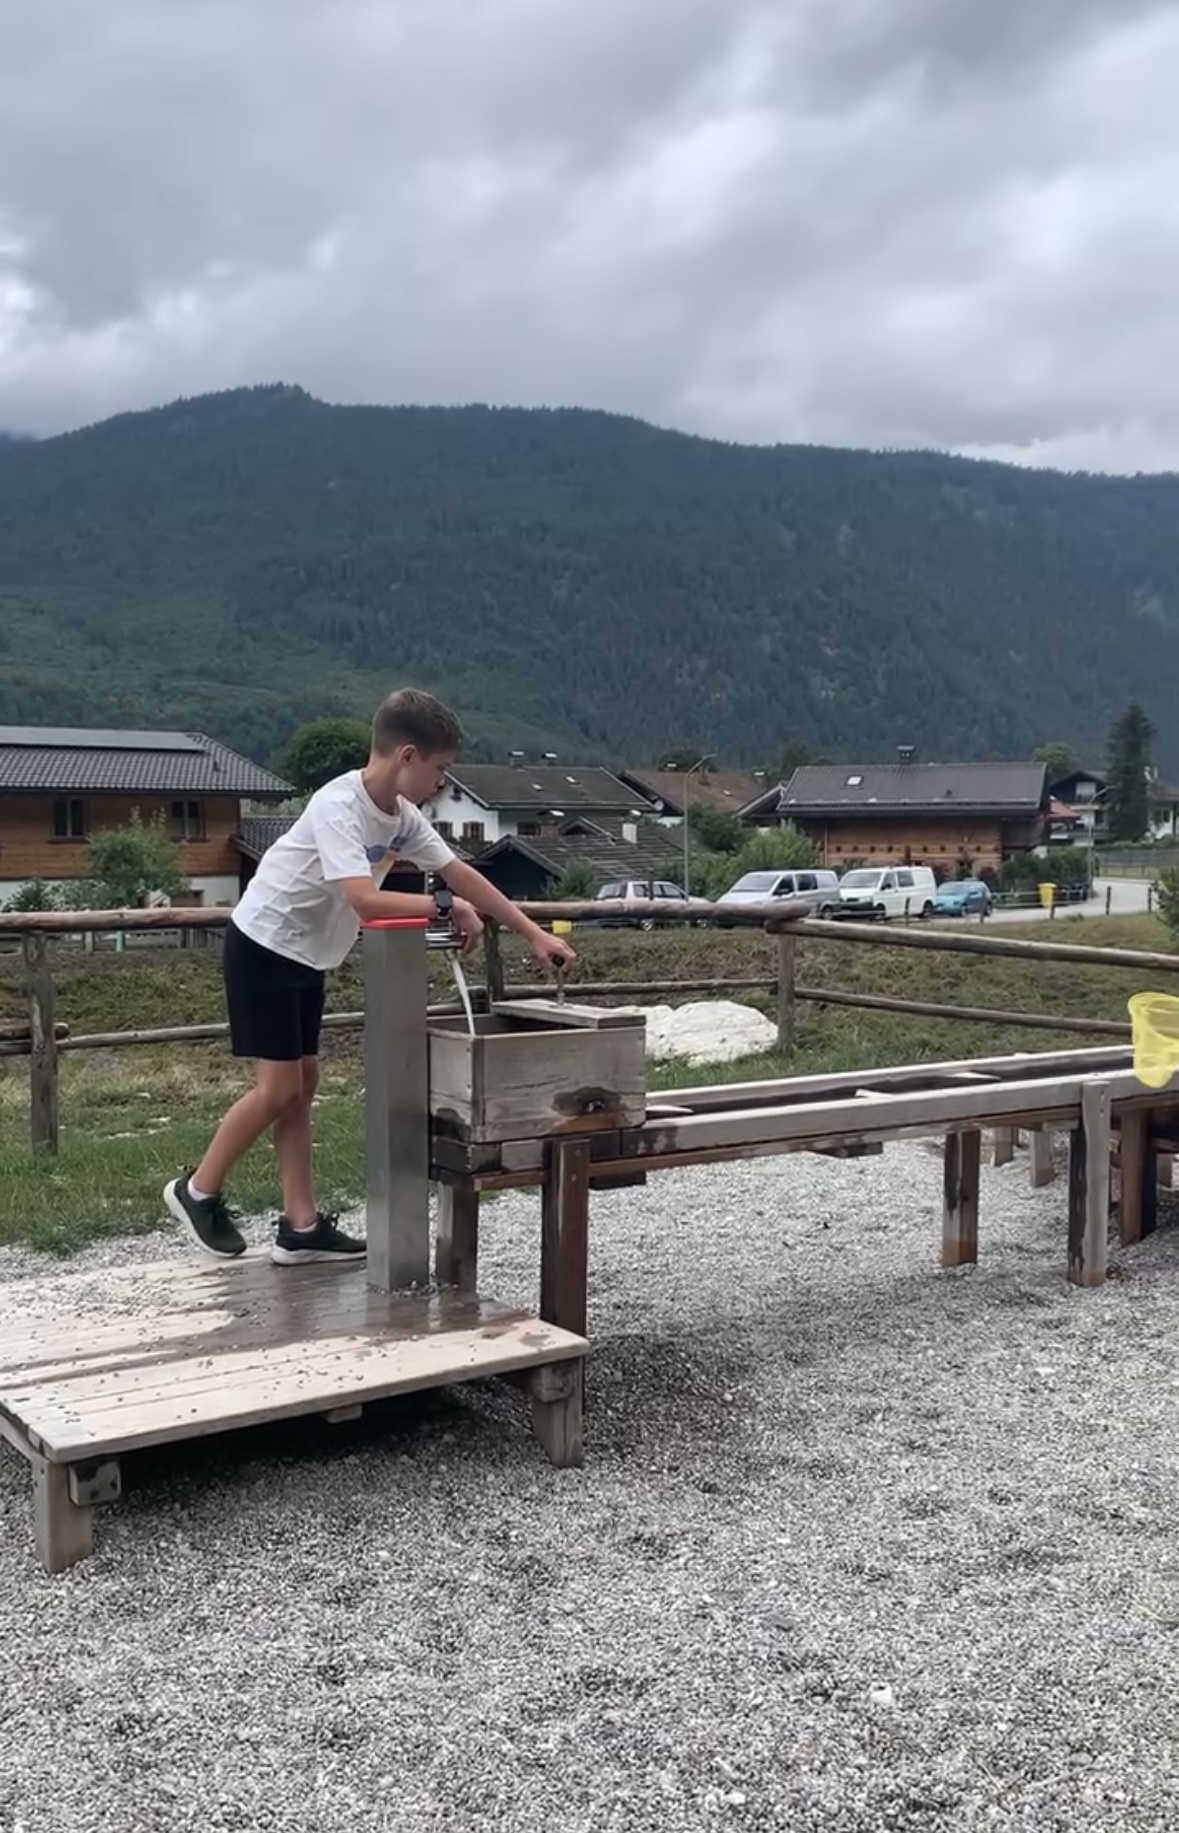 A boy playing at a water station at a park in Germany